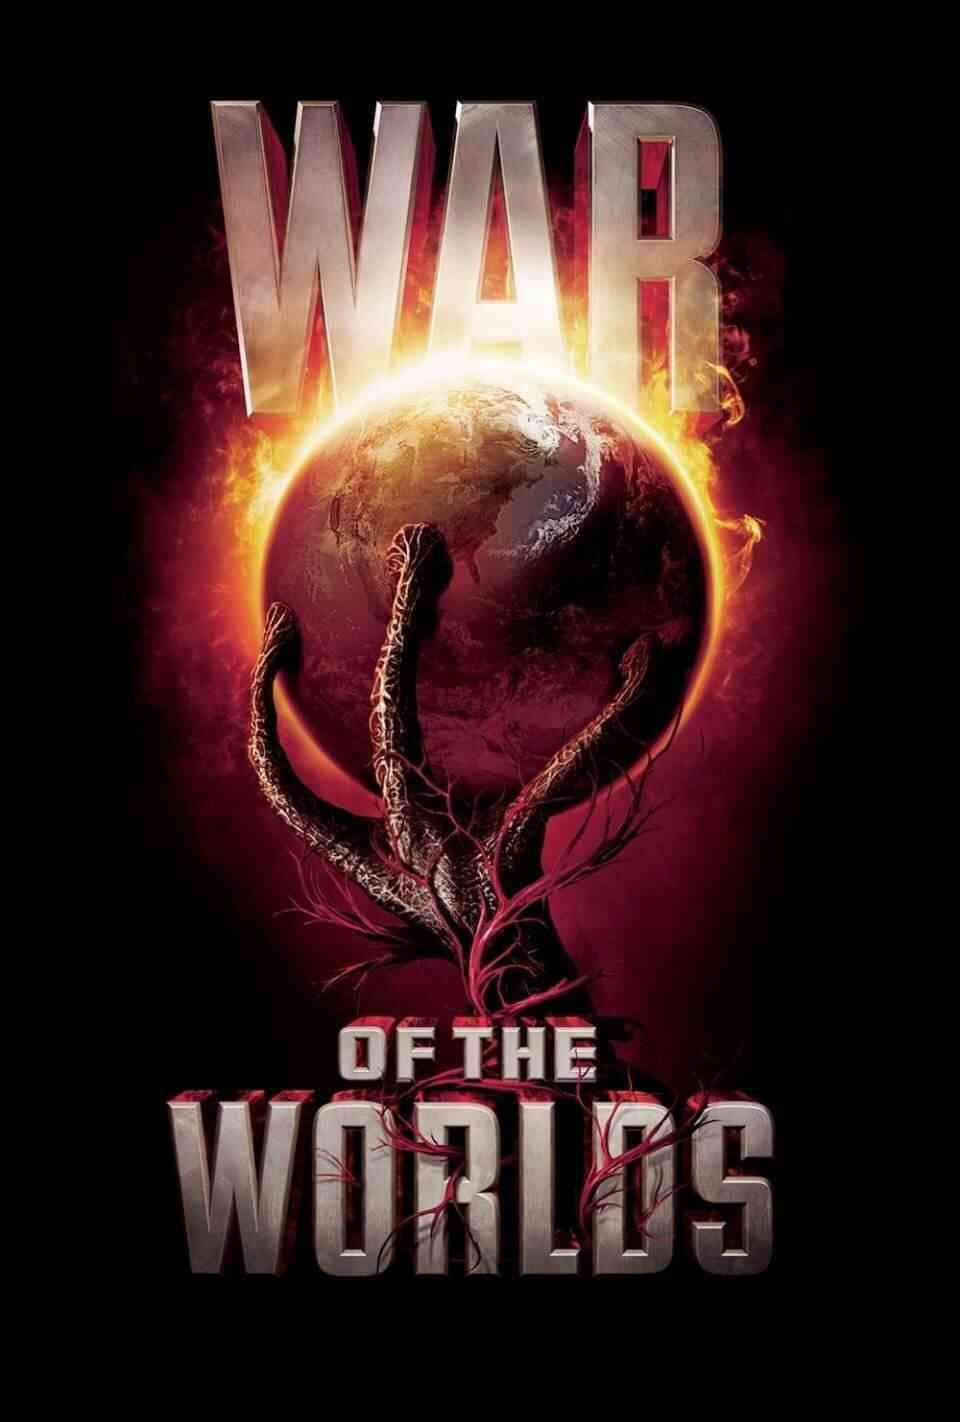 Read War of the Worlds screenplay.